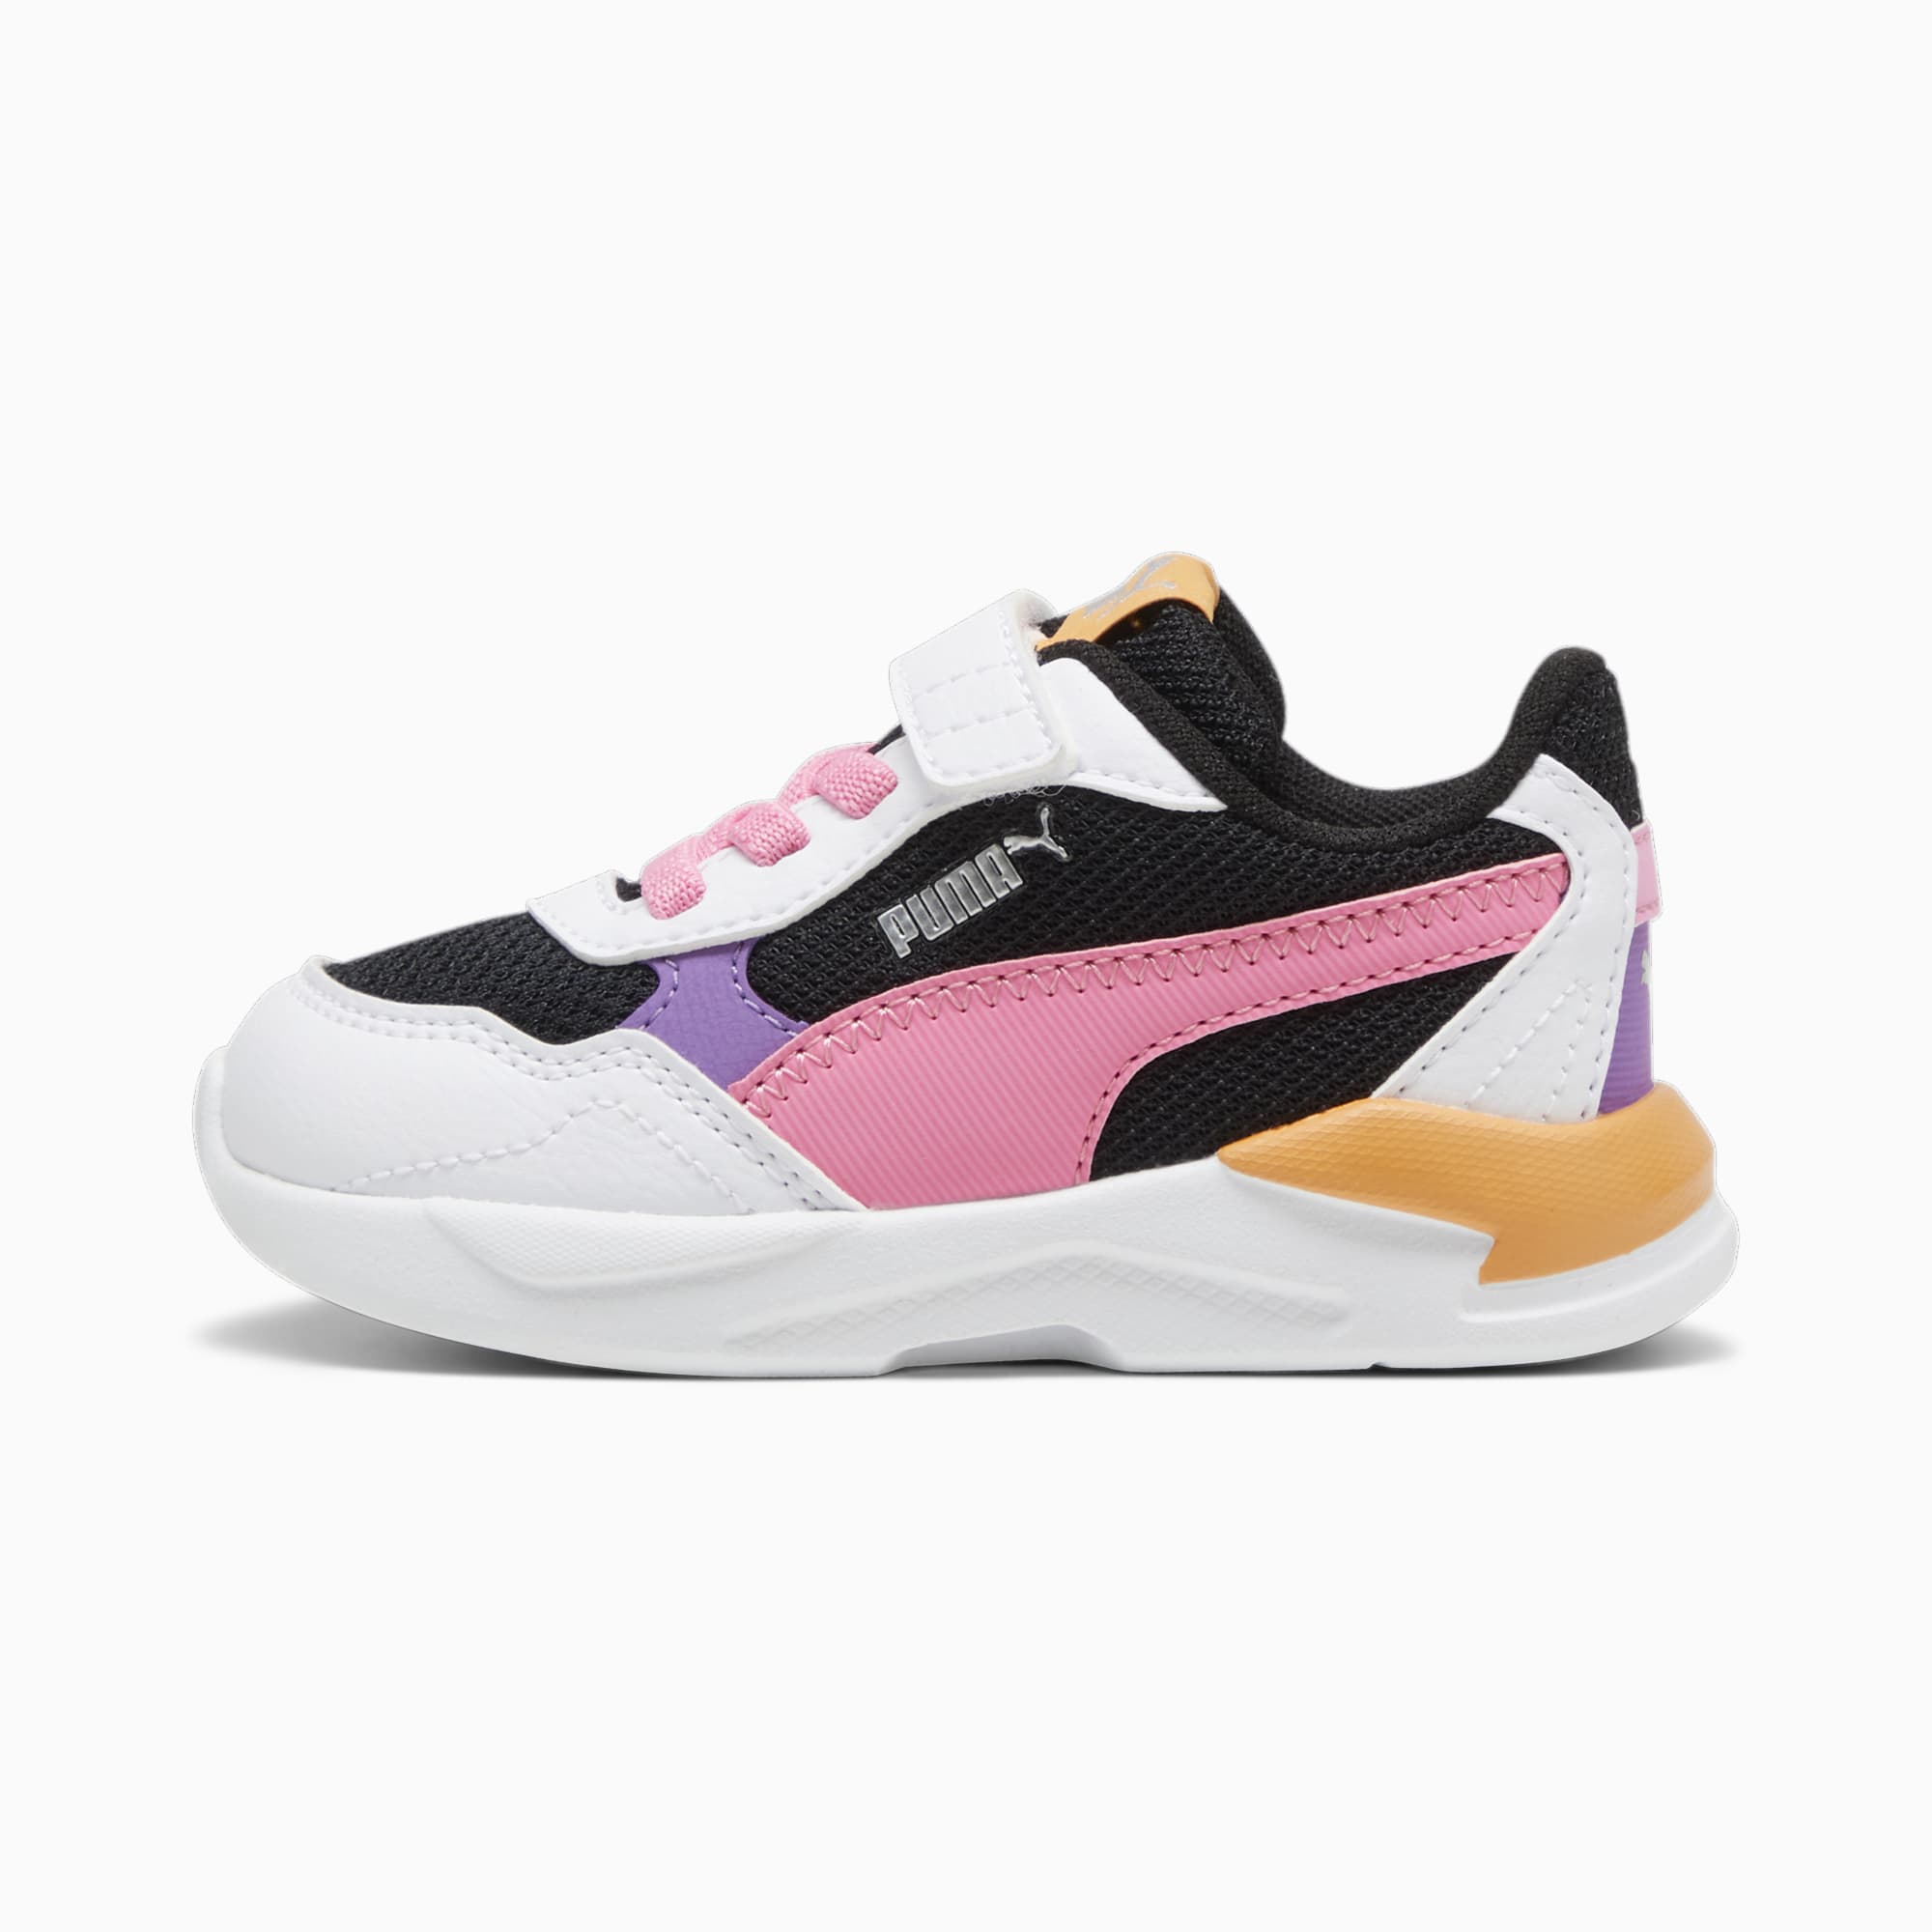 PUMA X-Ray Speed Lite AC Babies' Trainers, Black/Fast Pink/White, Size 19, Shoes